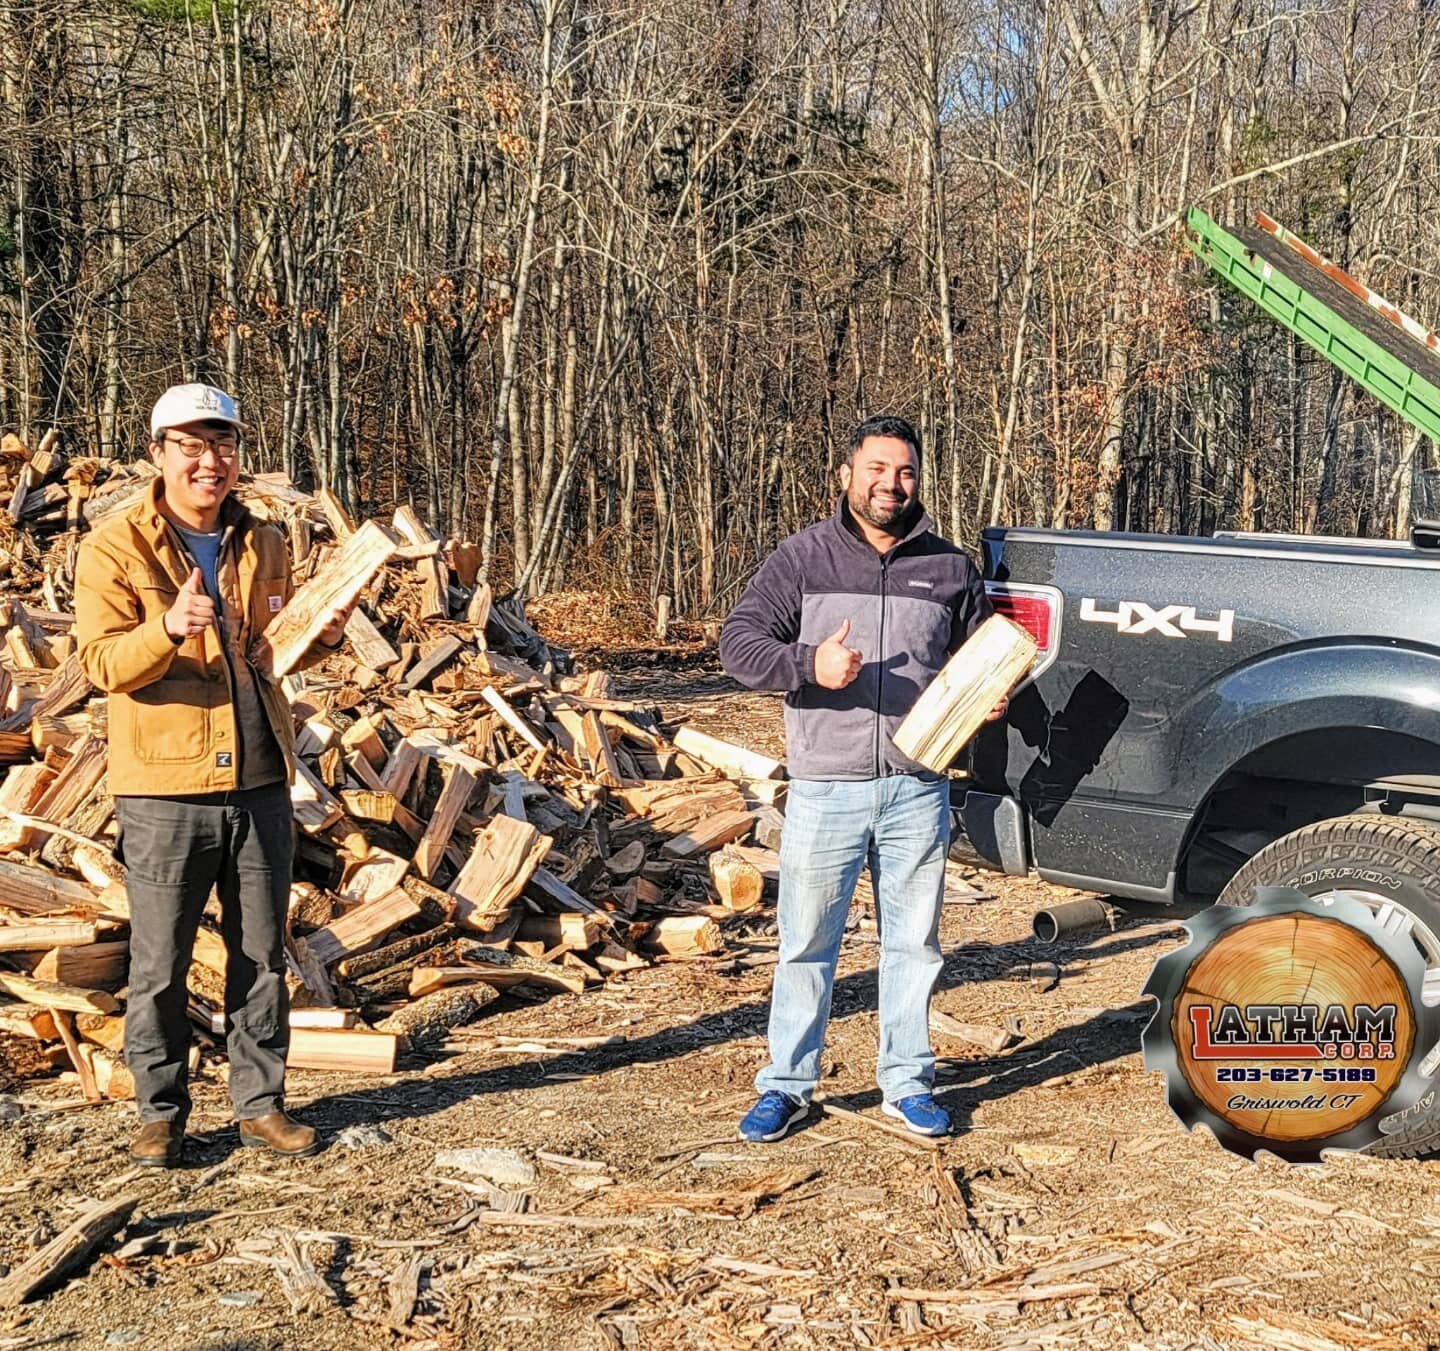 These guys knew where to go when they had to get their truckload! 😁👉🛻 Load your trunk with our seasoned Firewood. 🔥🔥🔥 Call or Text Frank to schedule a pickup time: 203-627-5189 Serving families in #Griswold and surrounding towns in #CT.  www.la